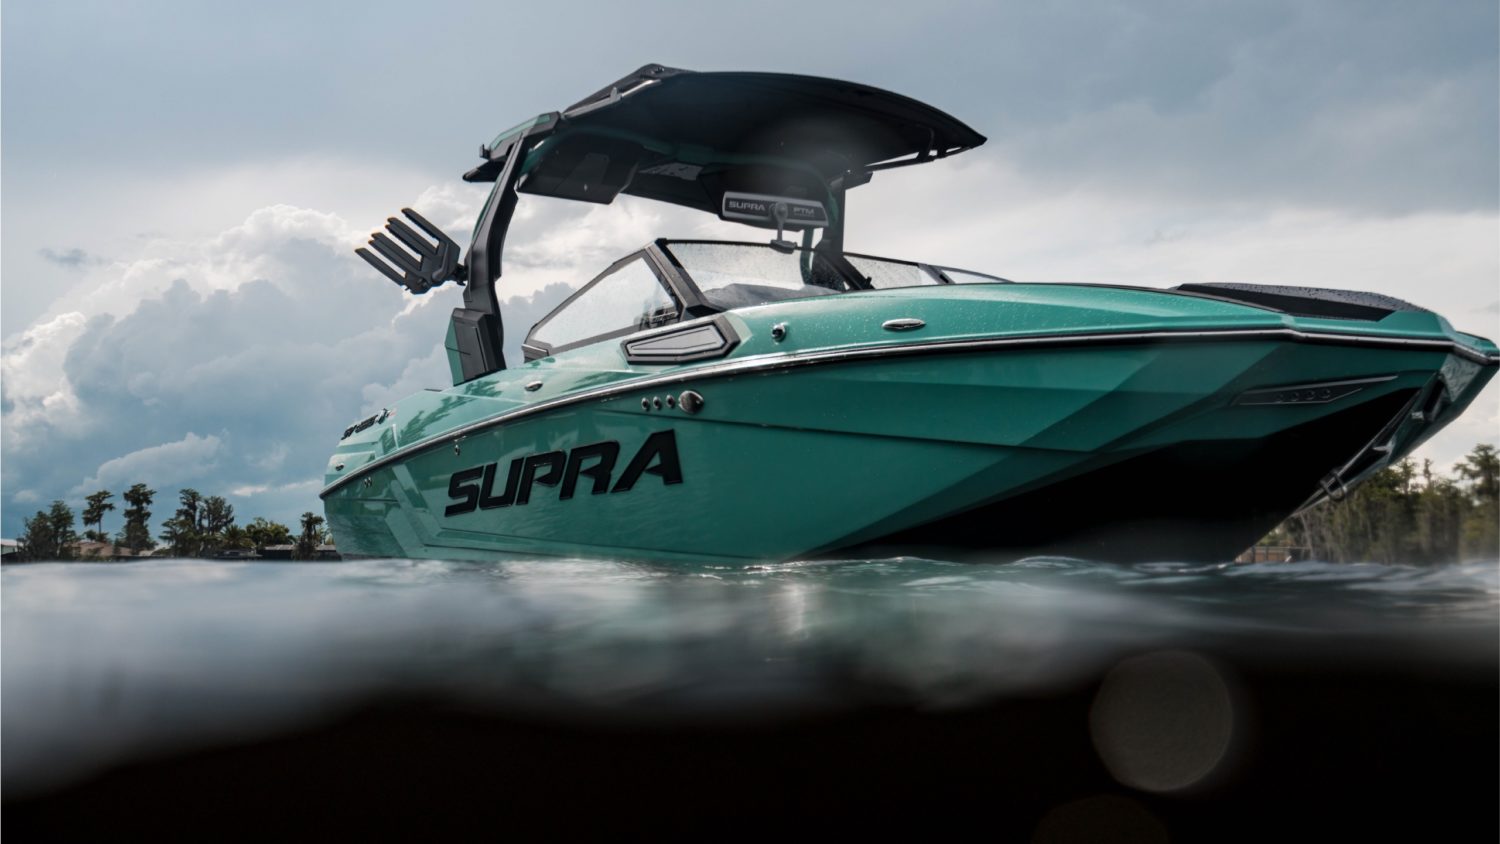 the brand new SUPRA model will be exhibited in Geneva for the first time at a Swiss boat show